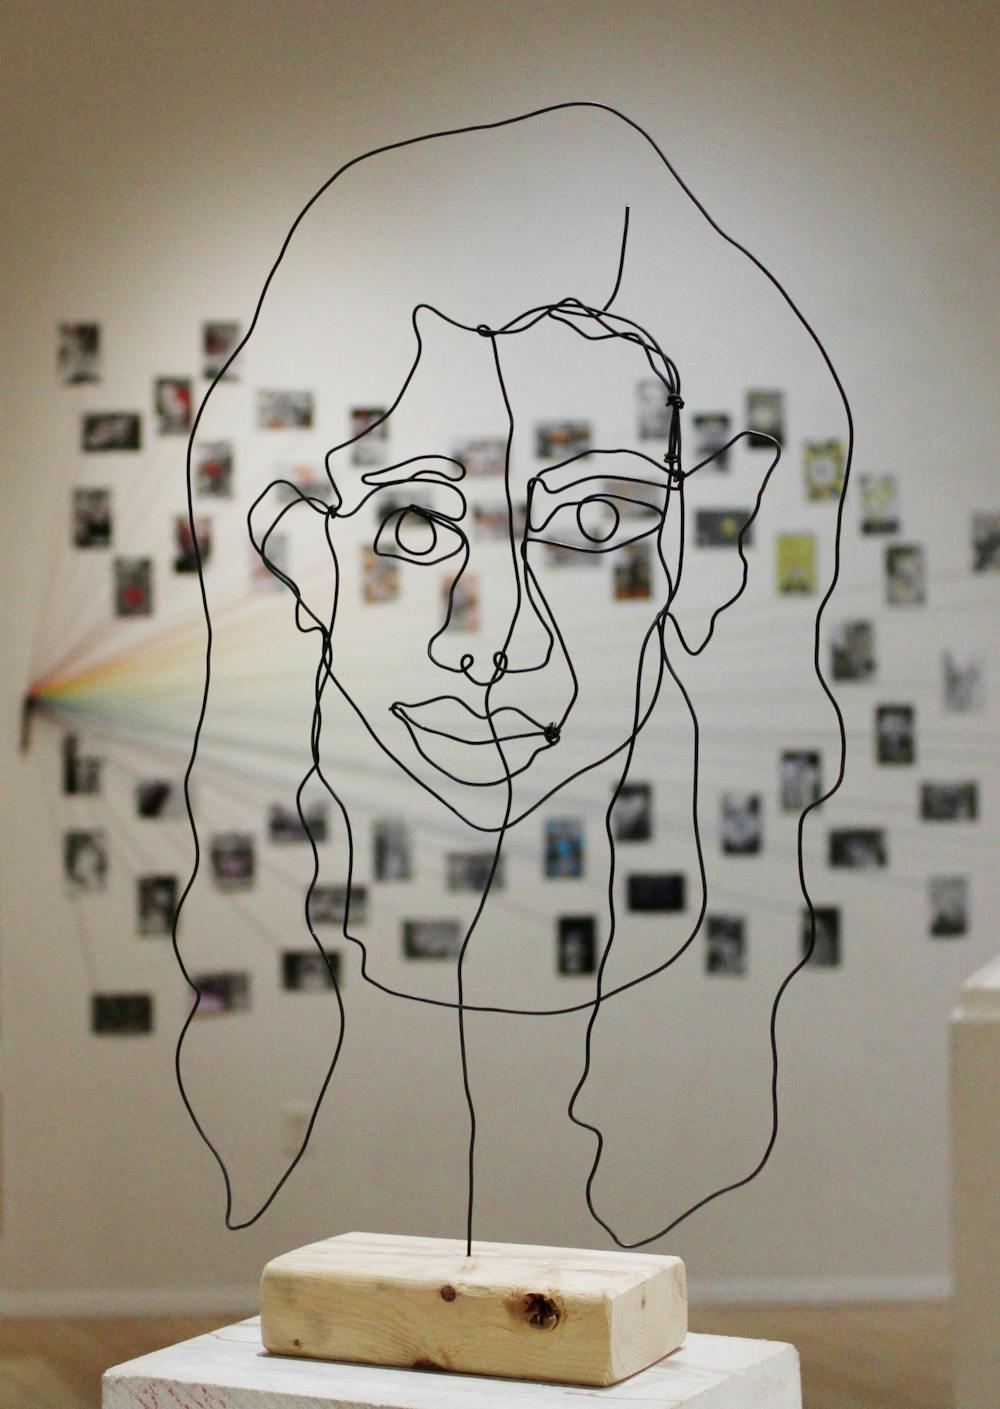 A Wire Self-Portrait made by Rachel Baker sits at the Art Exhibit Aug. 18 in the Art and Journalism Building. The Self-Portrait was made in ADS 102, 3D Foundations during the Spring 2022 semester. Amber Pietz, DN